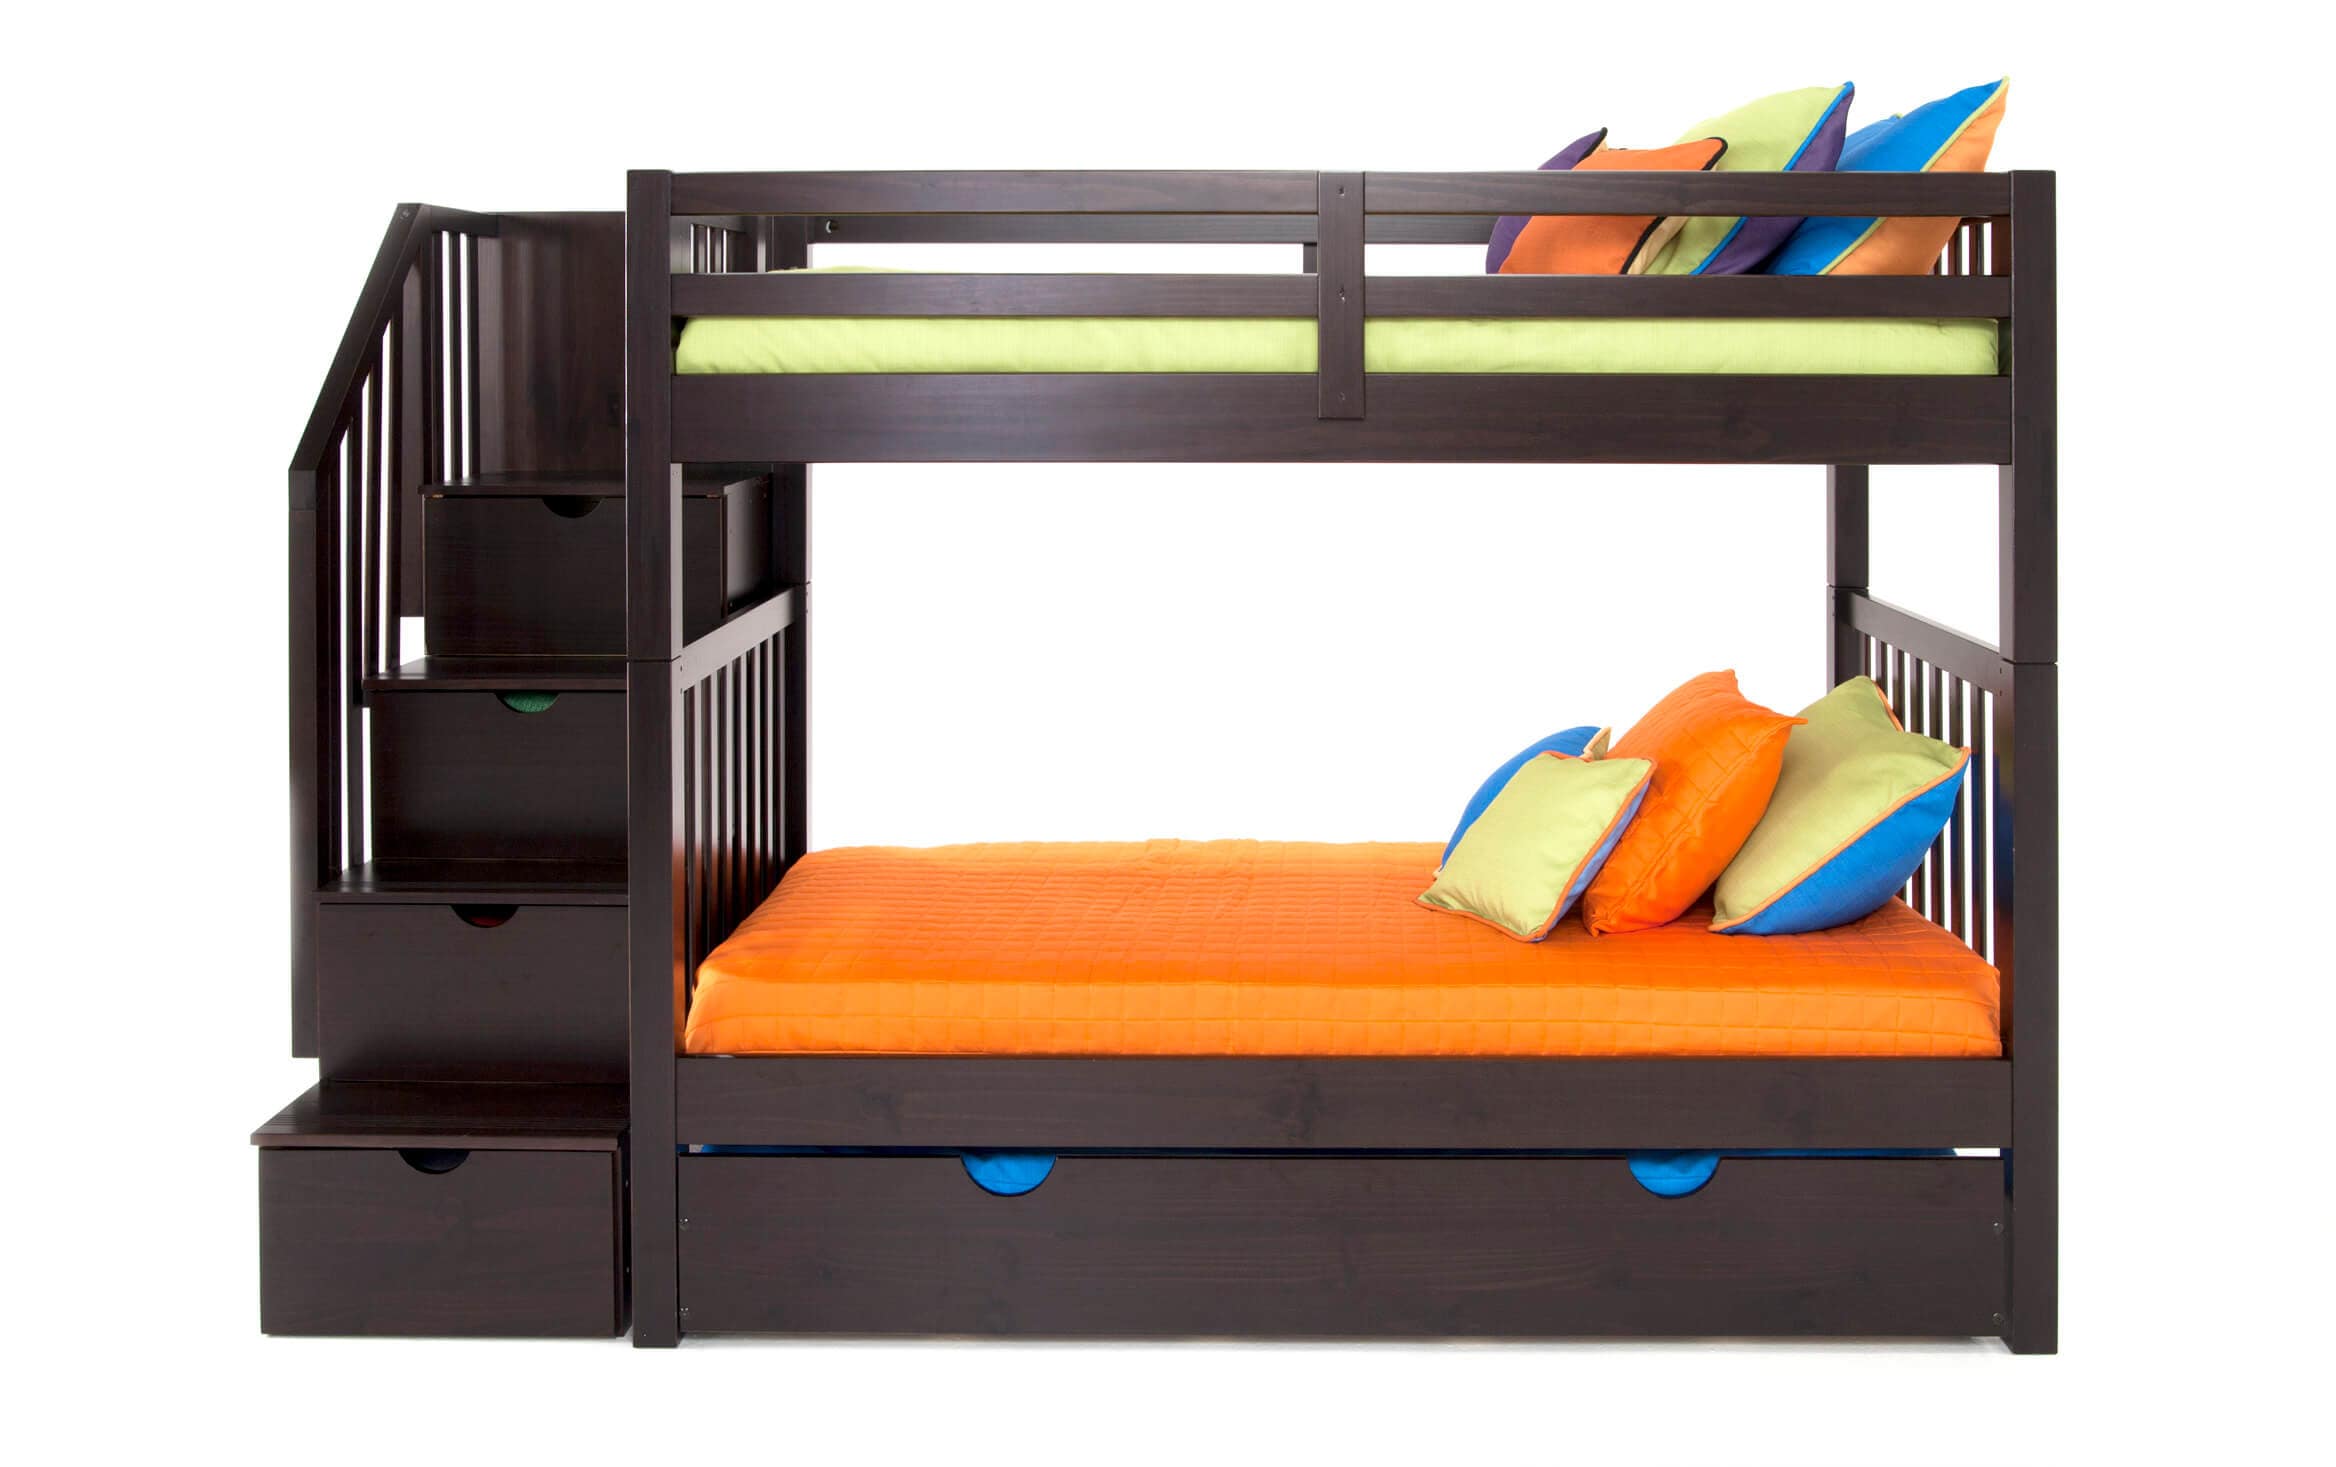 Keystone Twin Espresso Stairway Bunk, Bunk Beds Sold With Mattresses